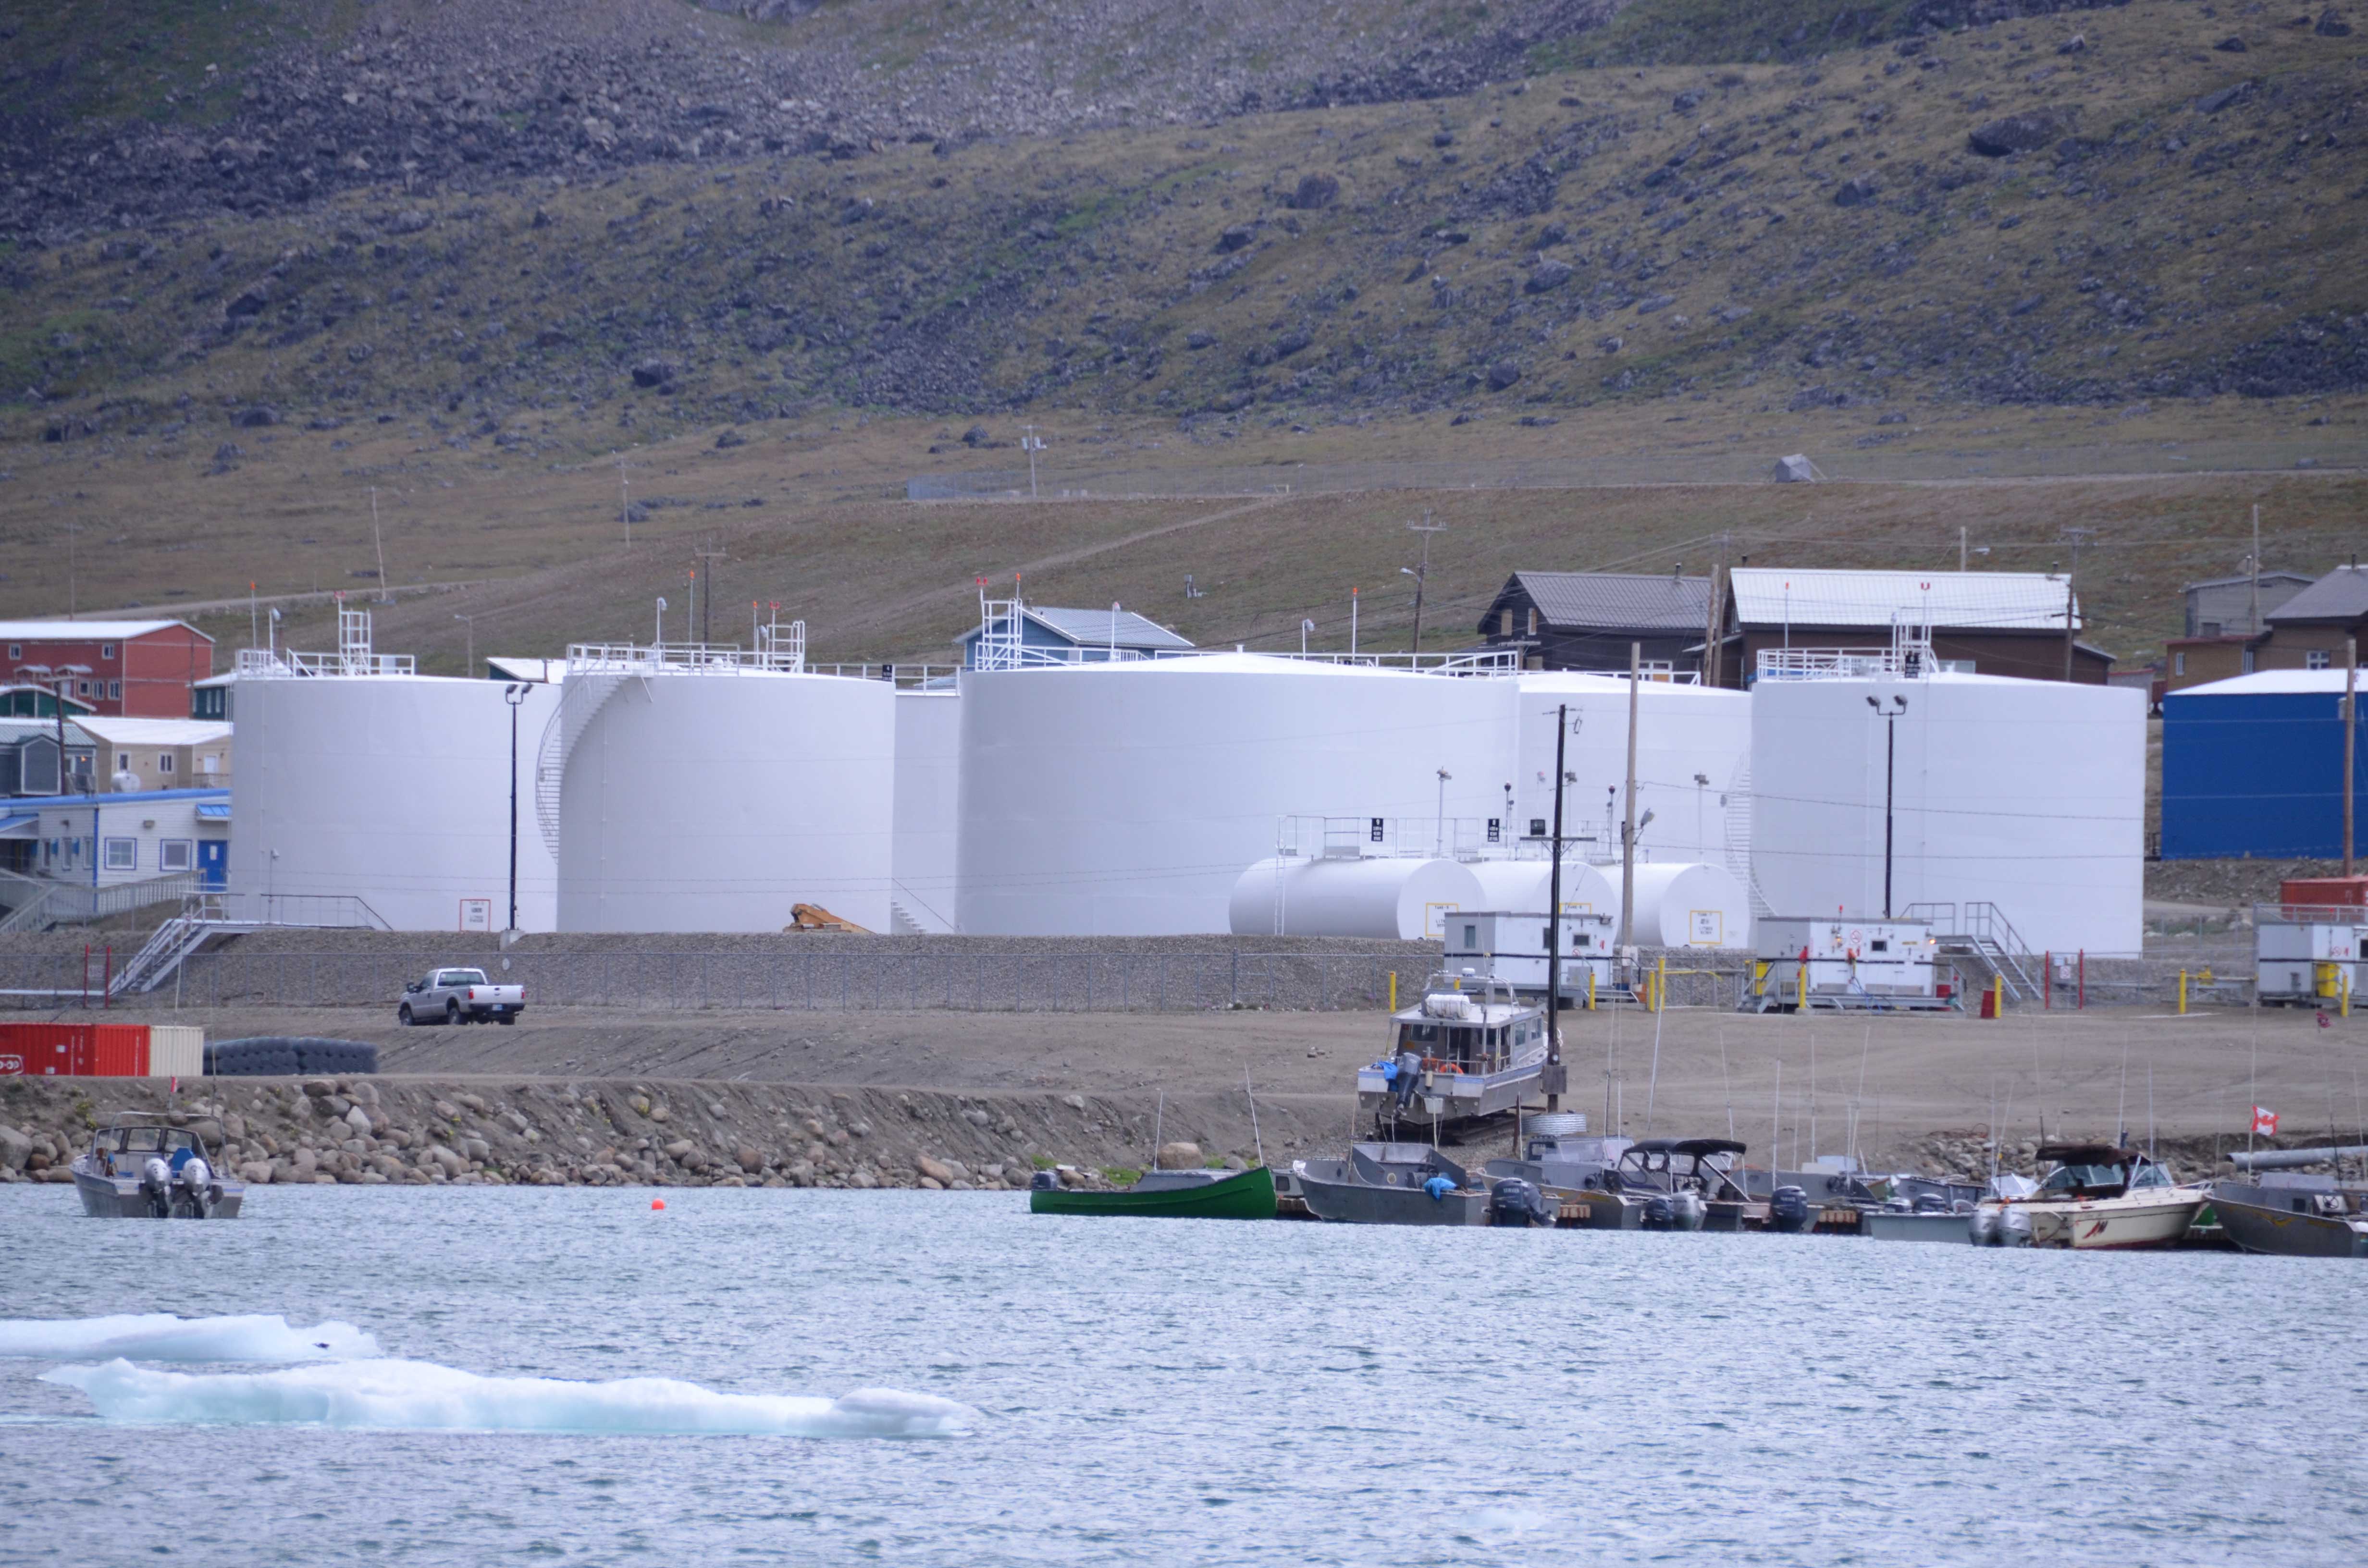 Large white cylindrical tanks rise above the shore where boats are tied at a harbor.